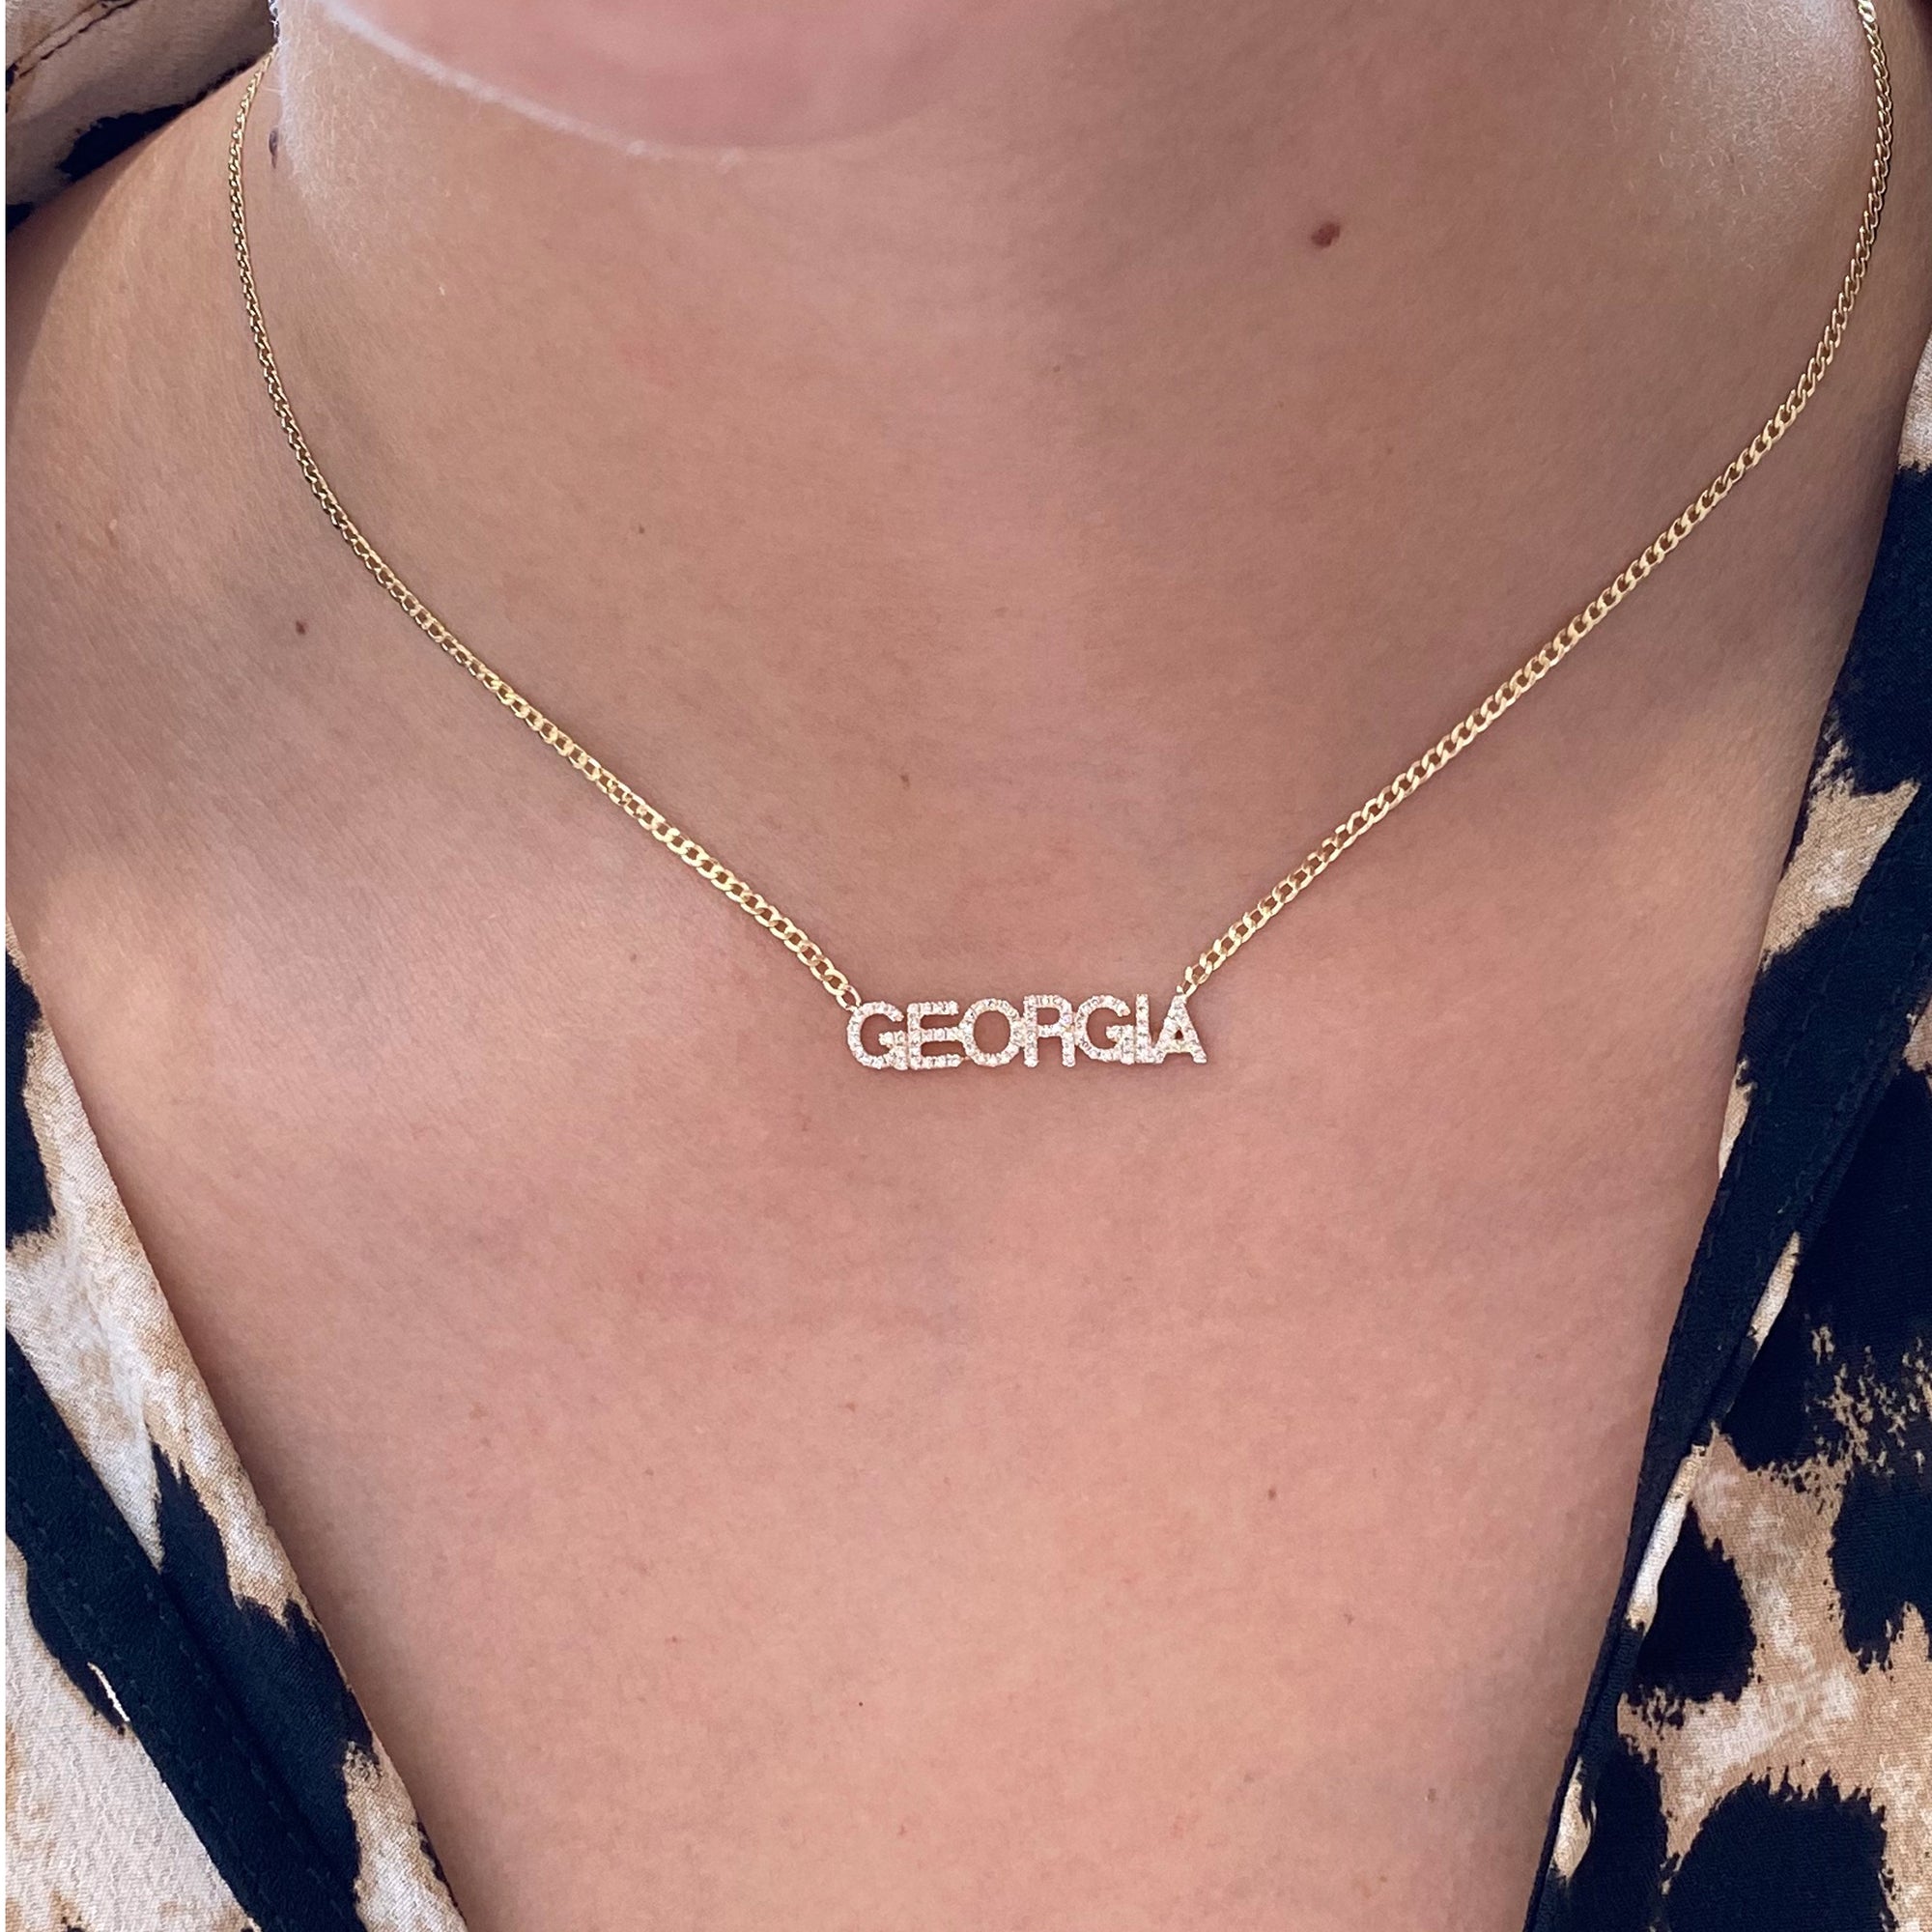 Diamond Name Curb Chain Necklace  - 14K gold weighing 4.52 grams  - 68 round diamonds totaling 0.22 carats